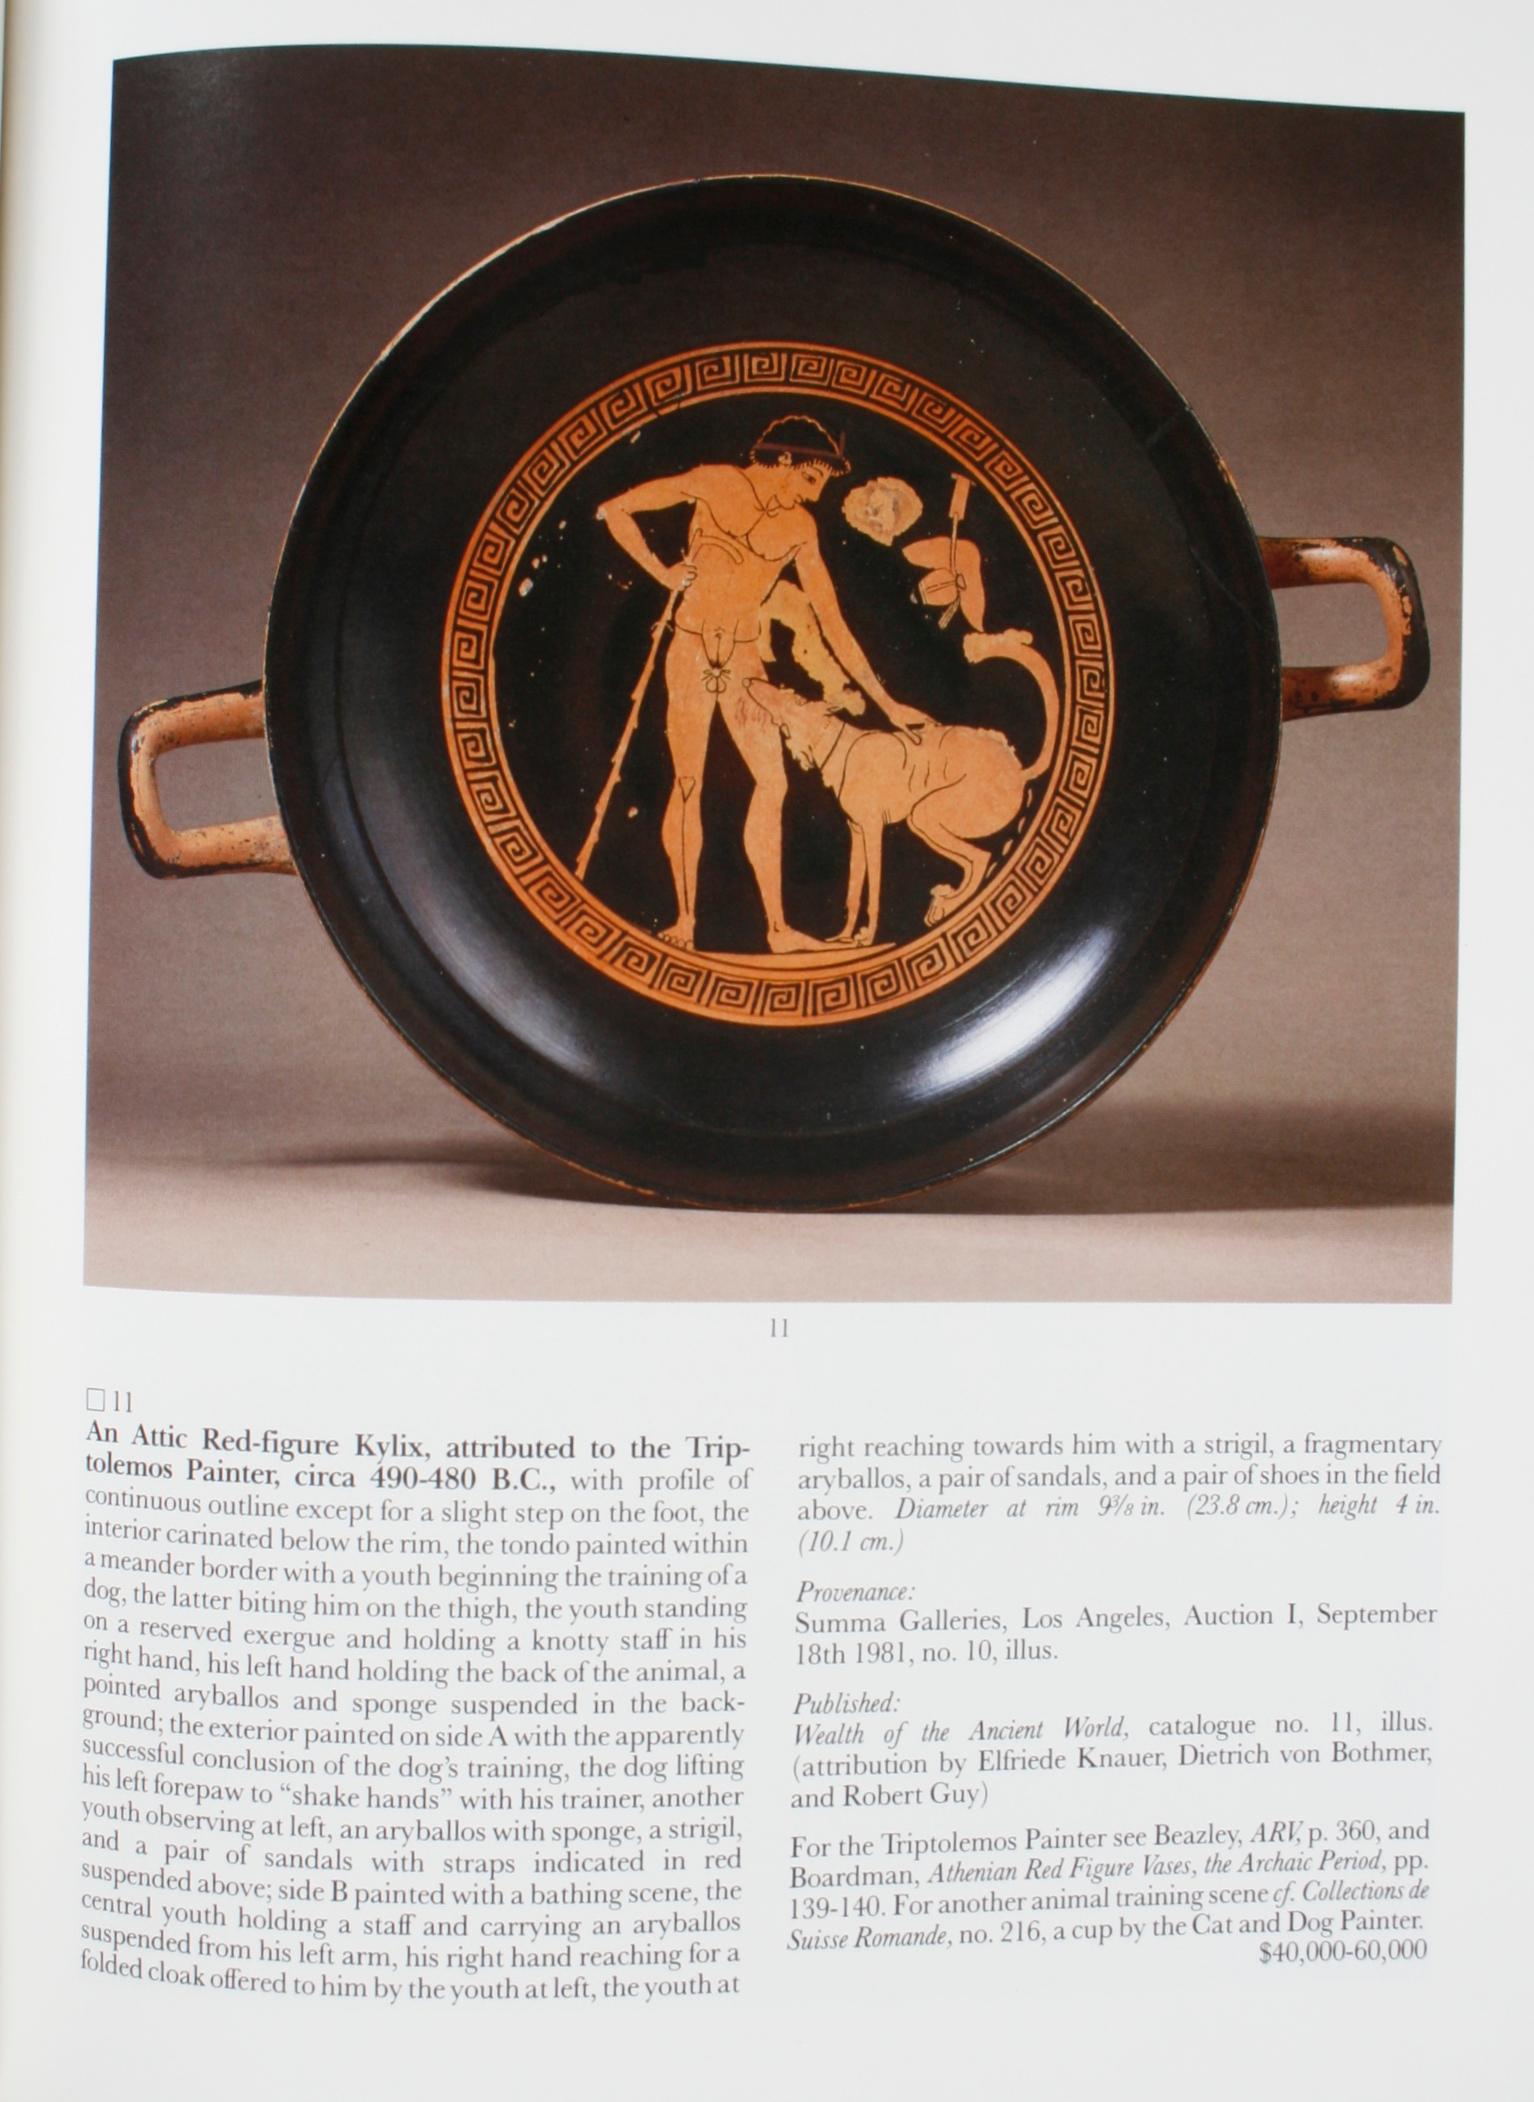 Sotheby's, Hunt Collection Highly Important Greek Vases Roman & Etruscan Bronzes For Sale 6